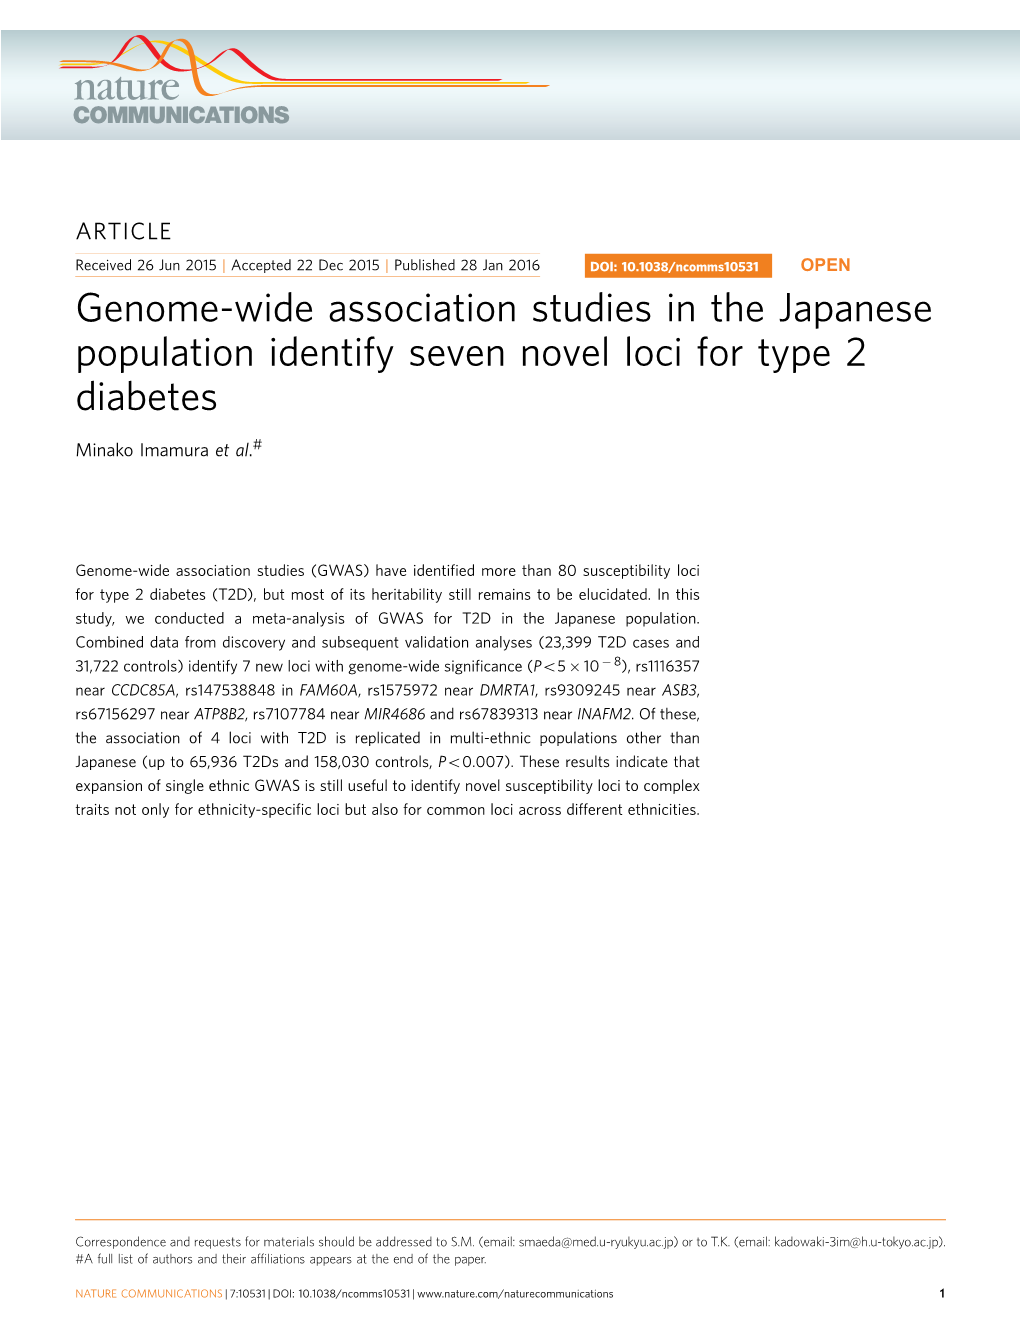 Genome-Wide Association Studies in the Japanese Population Identify Seven Novel Loci for Type 2 Diabetes